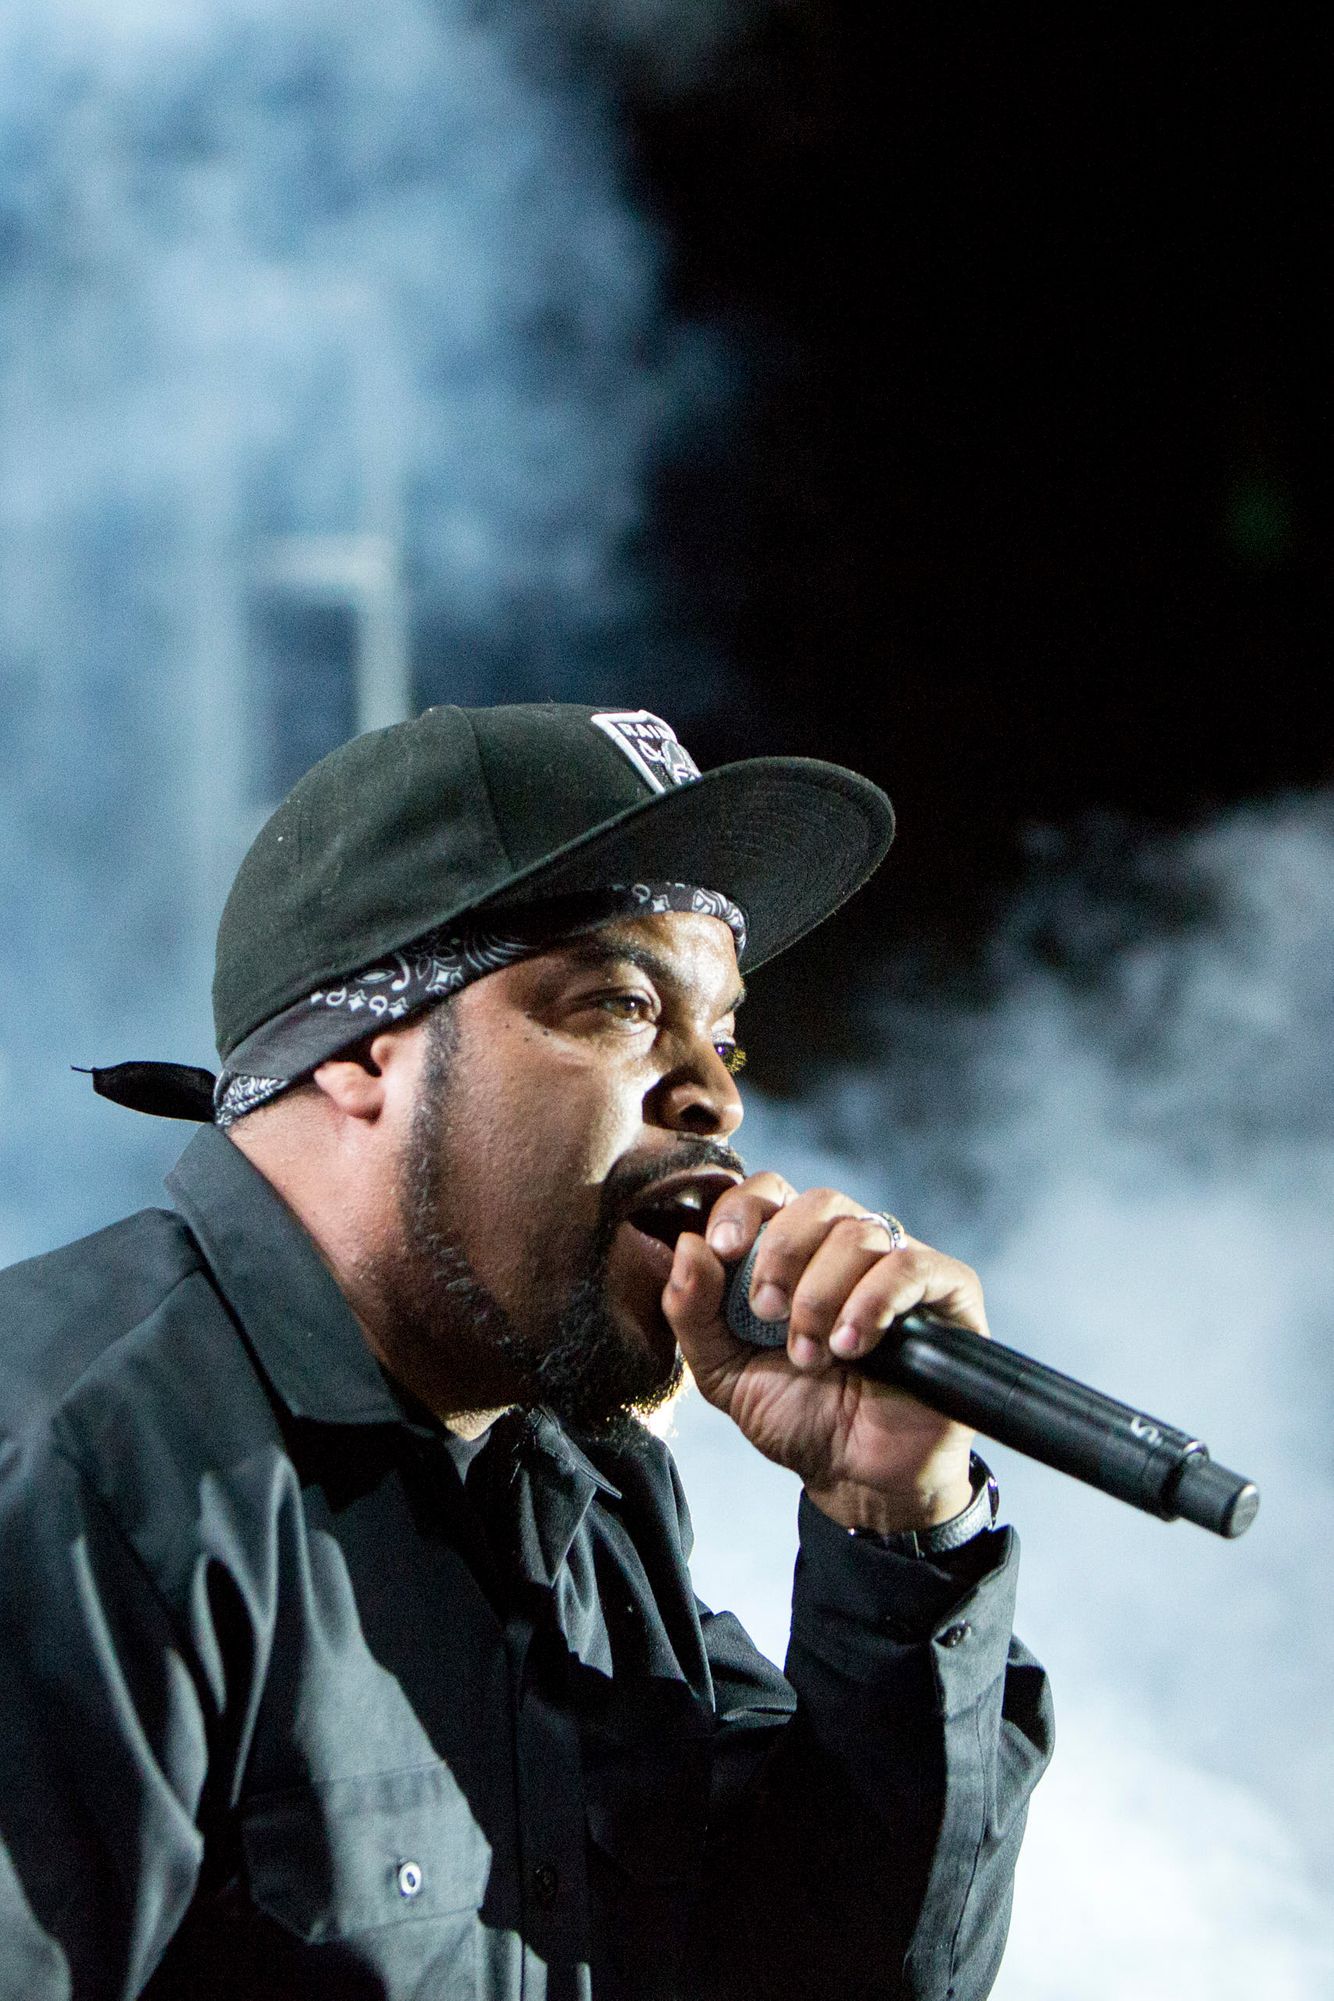 Ice Cube By Chicago Music Photographer Jeff Schear